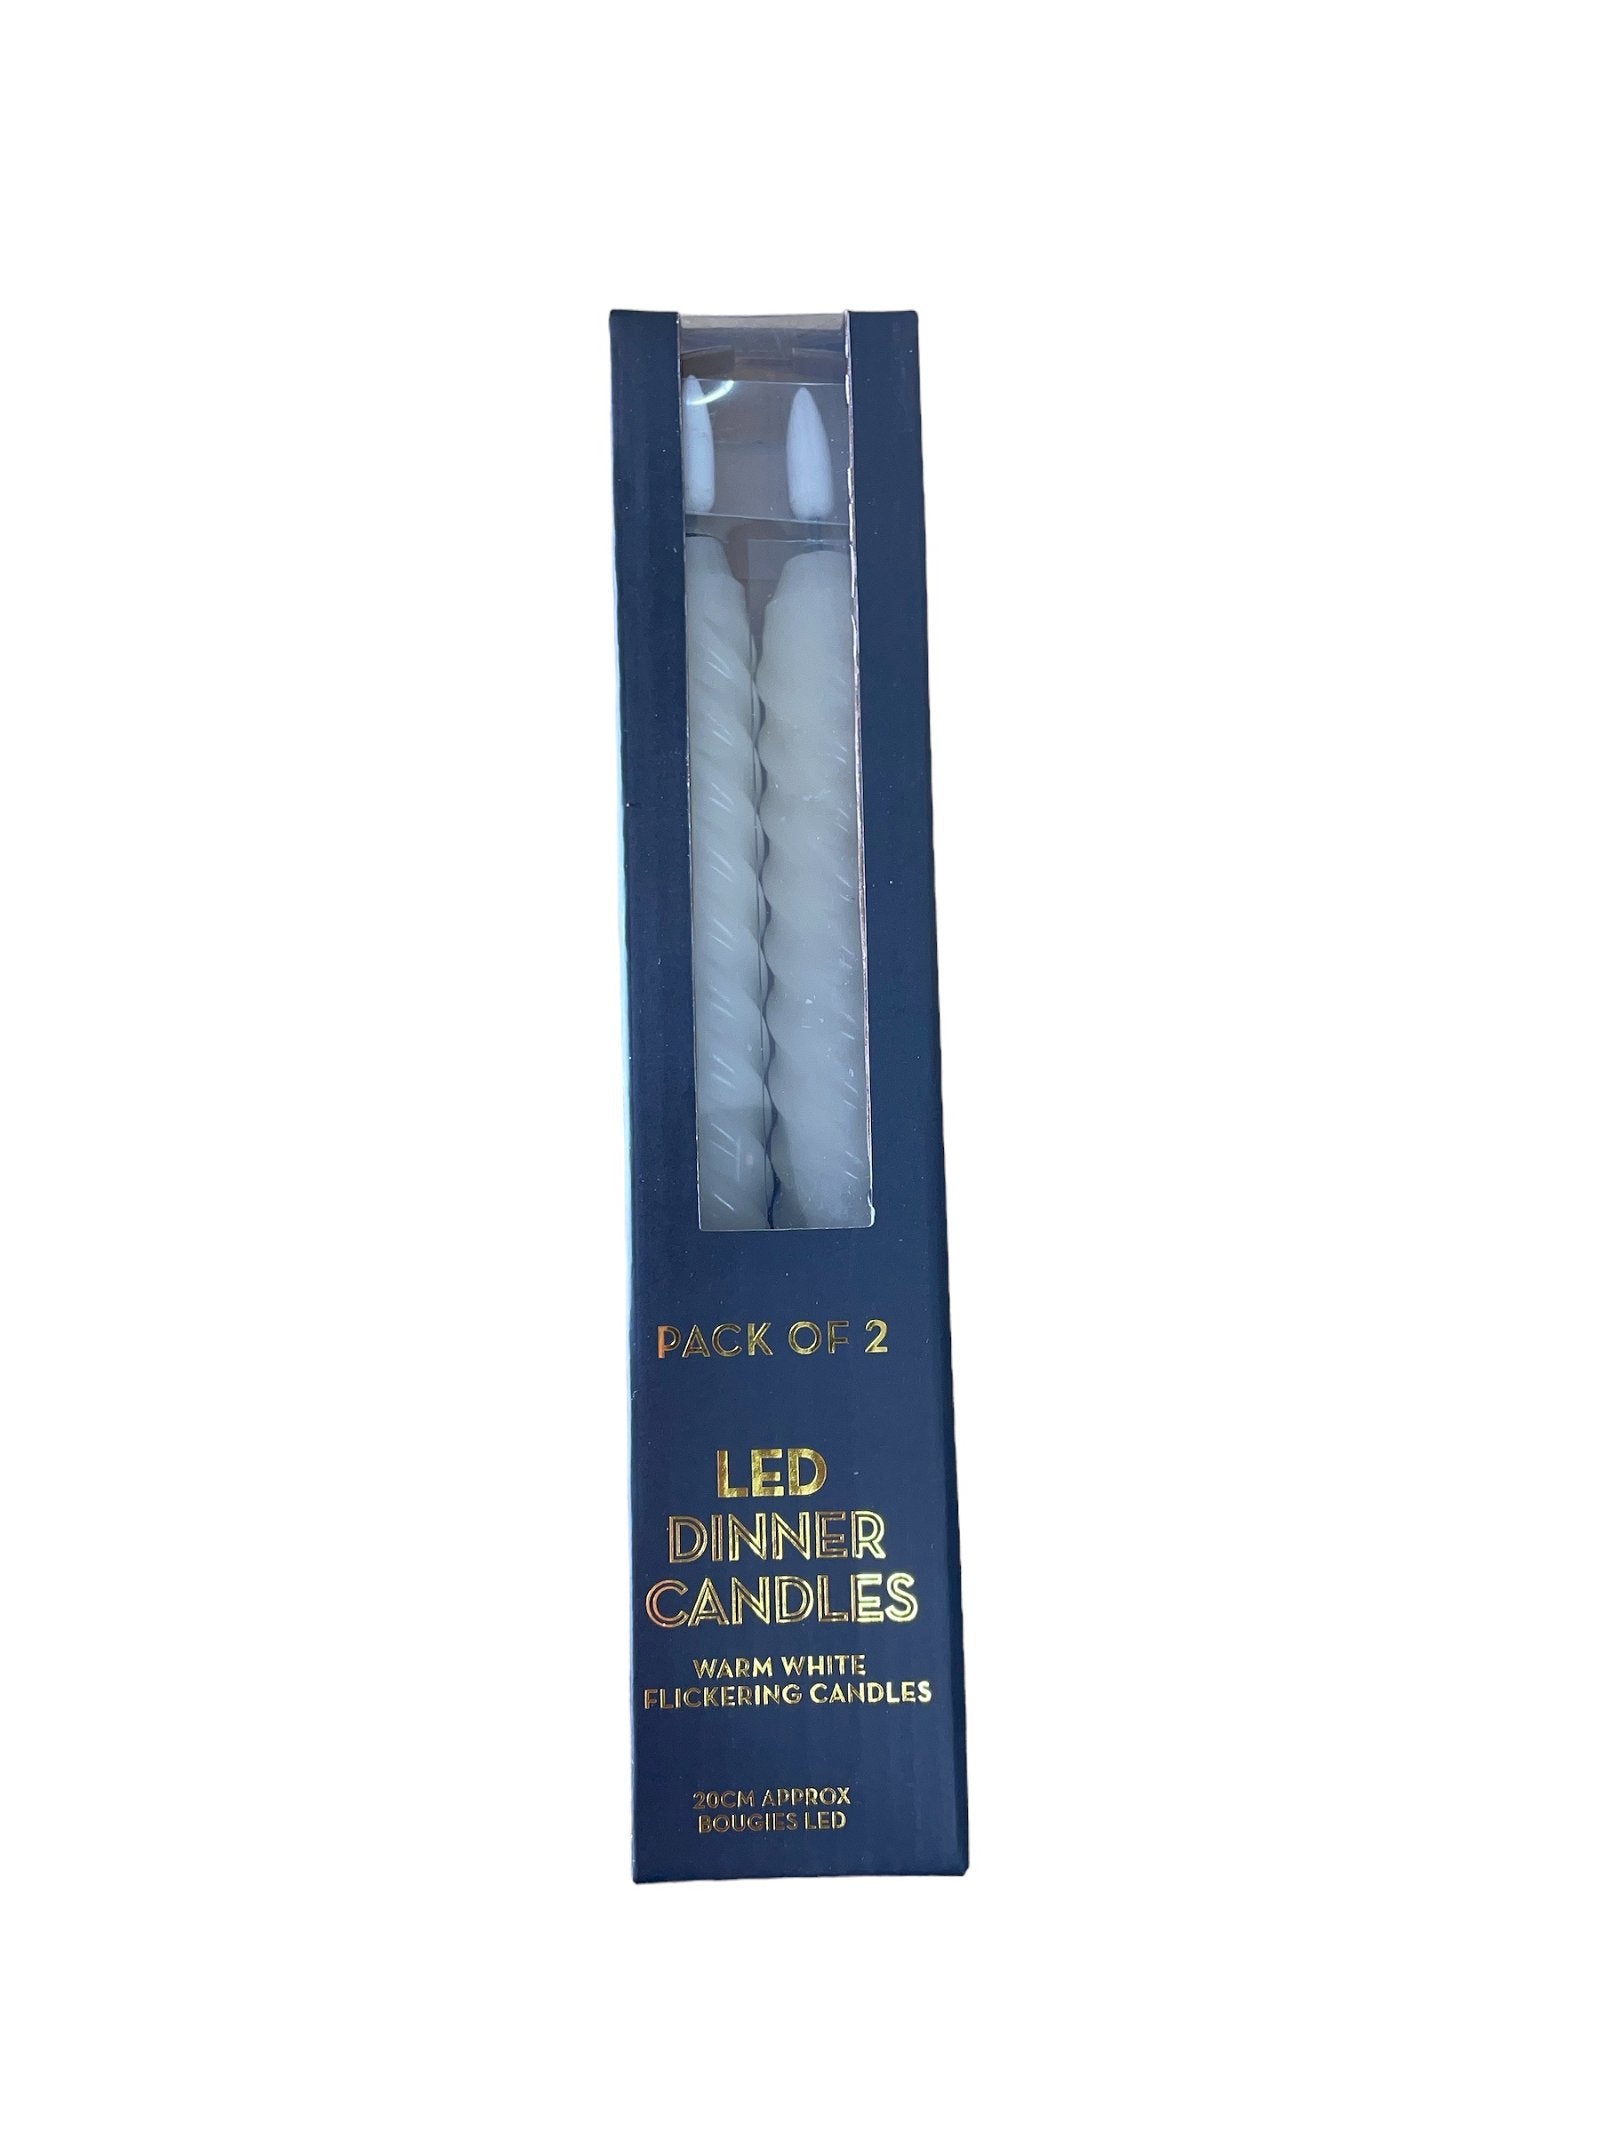 View Twist LED Candles Pack of 2 information